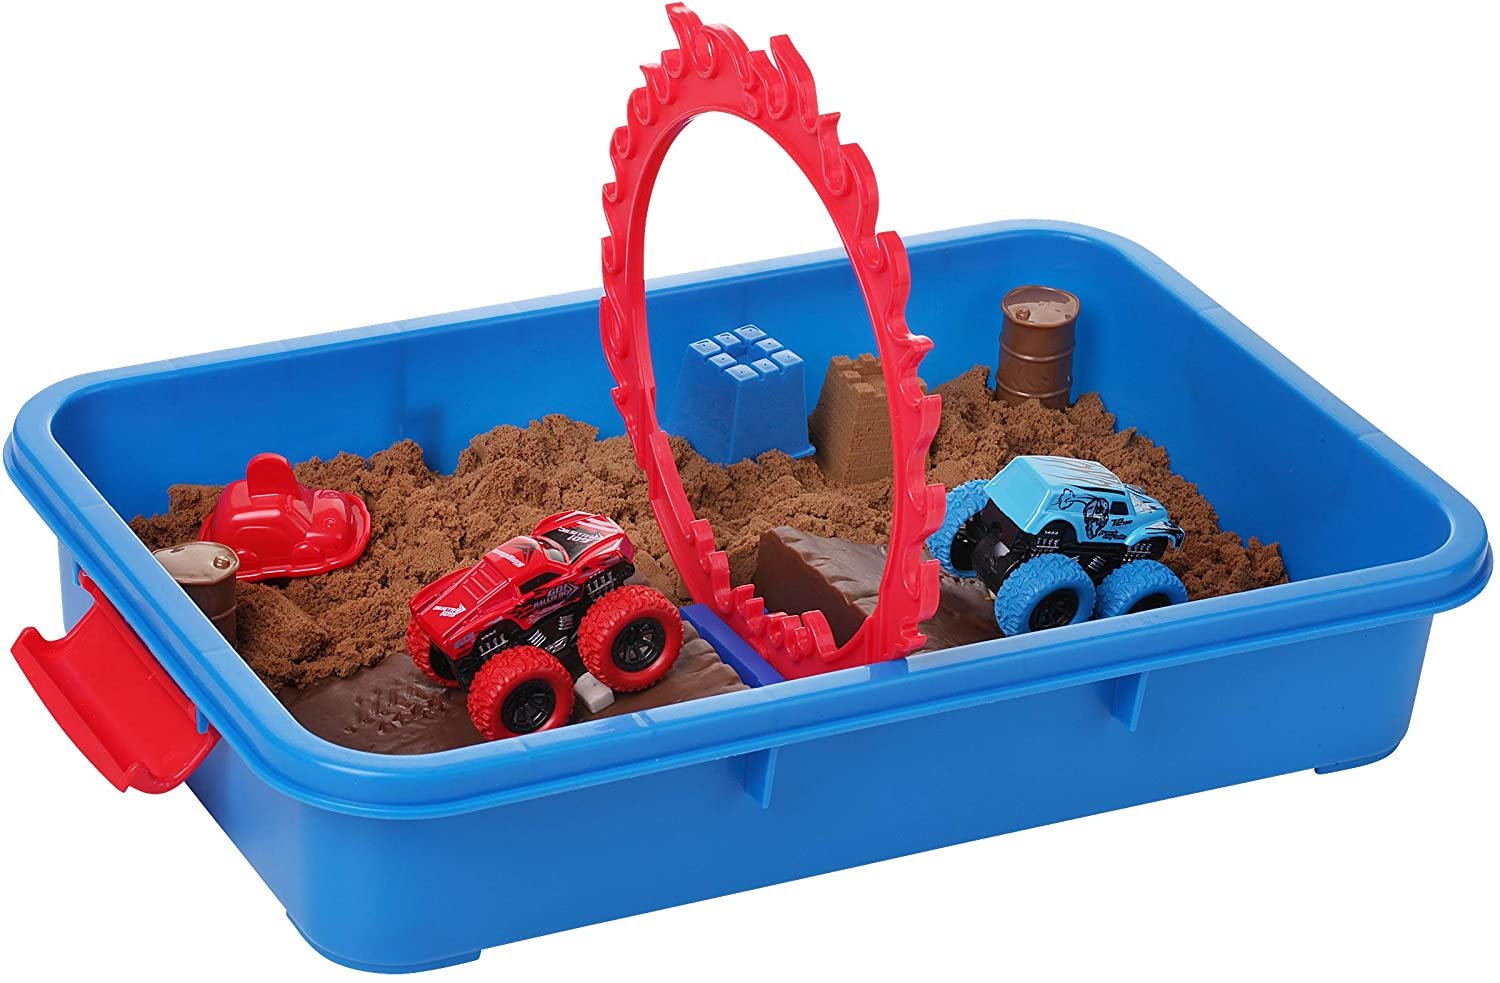 Dazmers Monster Truck Sand Play Set Sensory Kit for 3-4 5 Year Old Toddlers